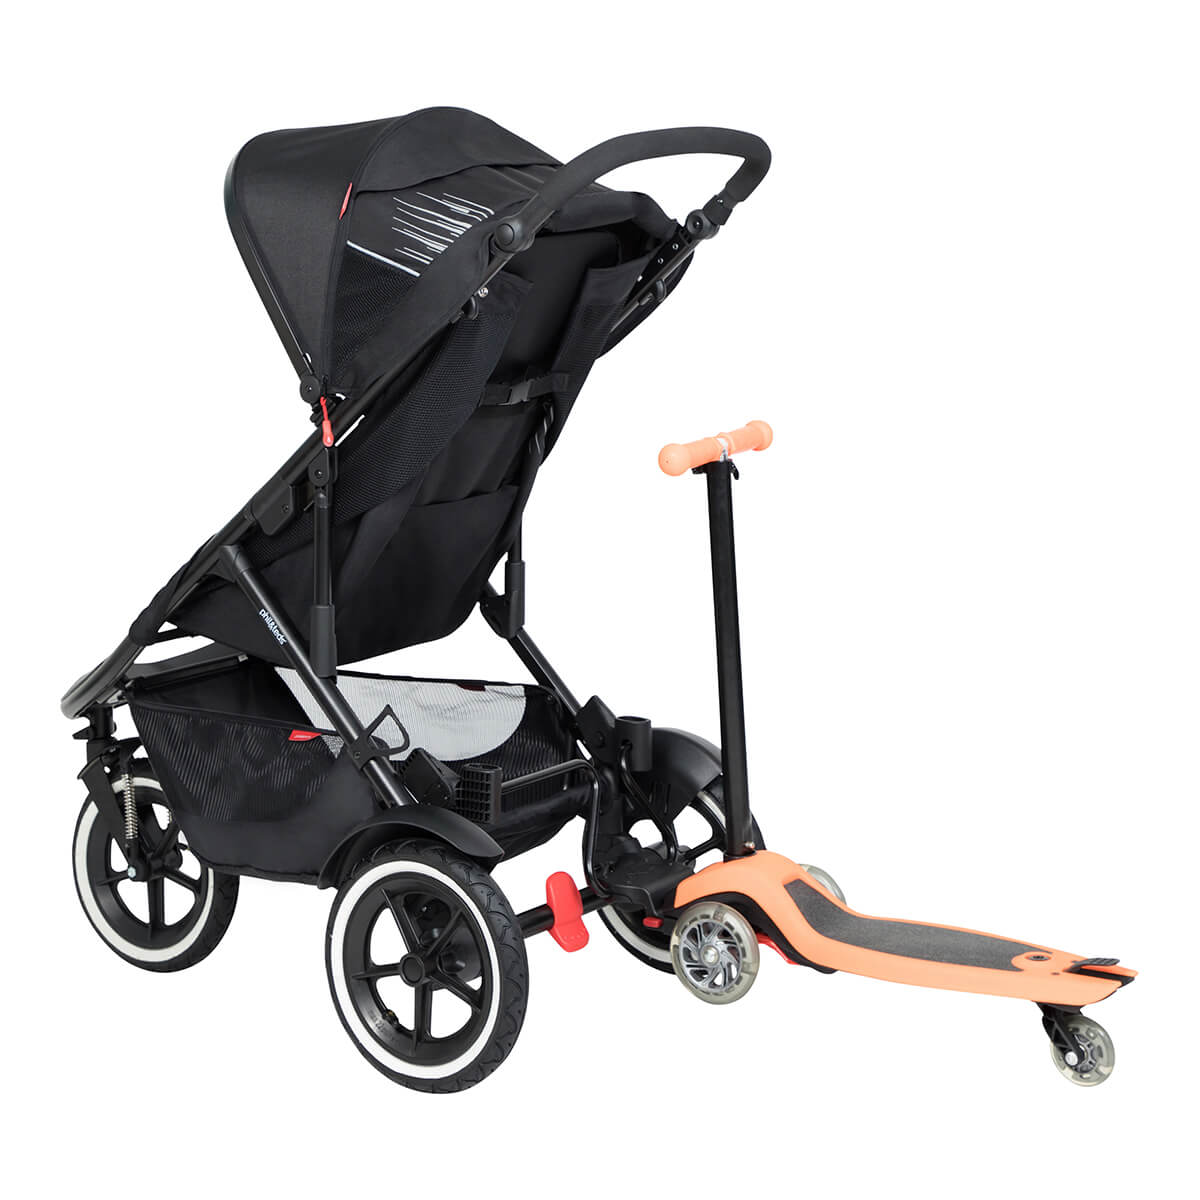 https://cdn.accentuate.io/4343443488802/19437753860274/philteds-sport-buggy-with-freerider-stroller-board-in-rear-v1626482671808.jpg?1200x1200